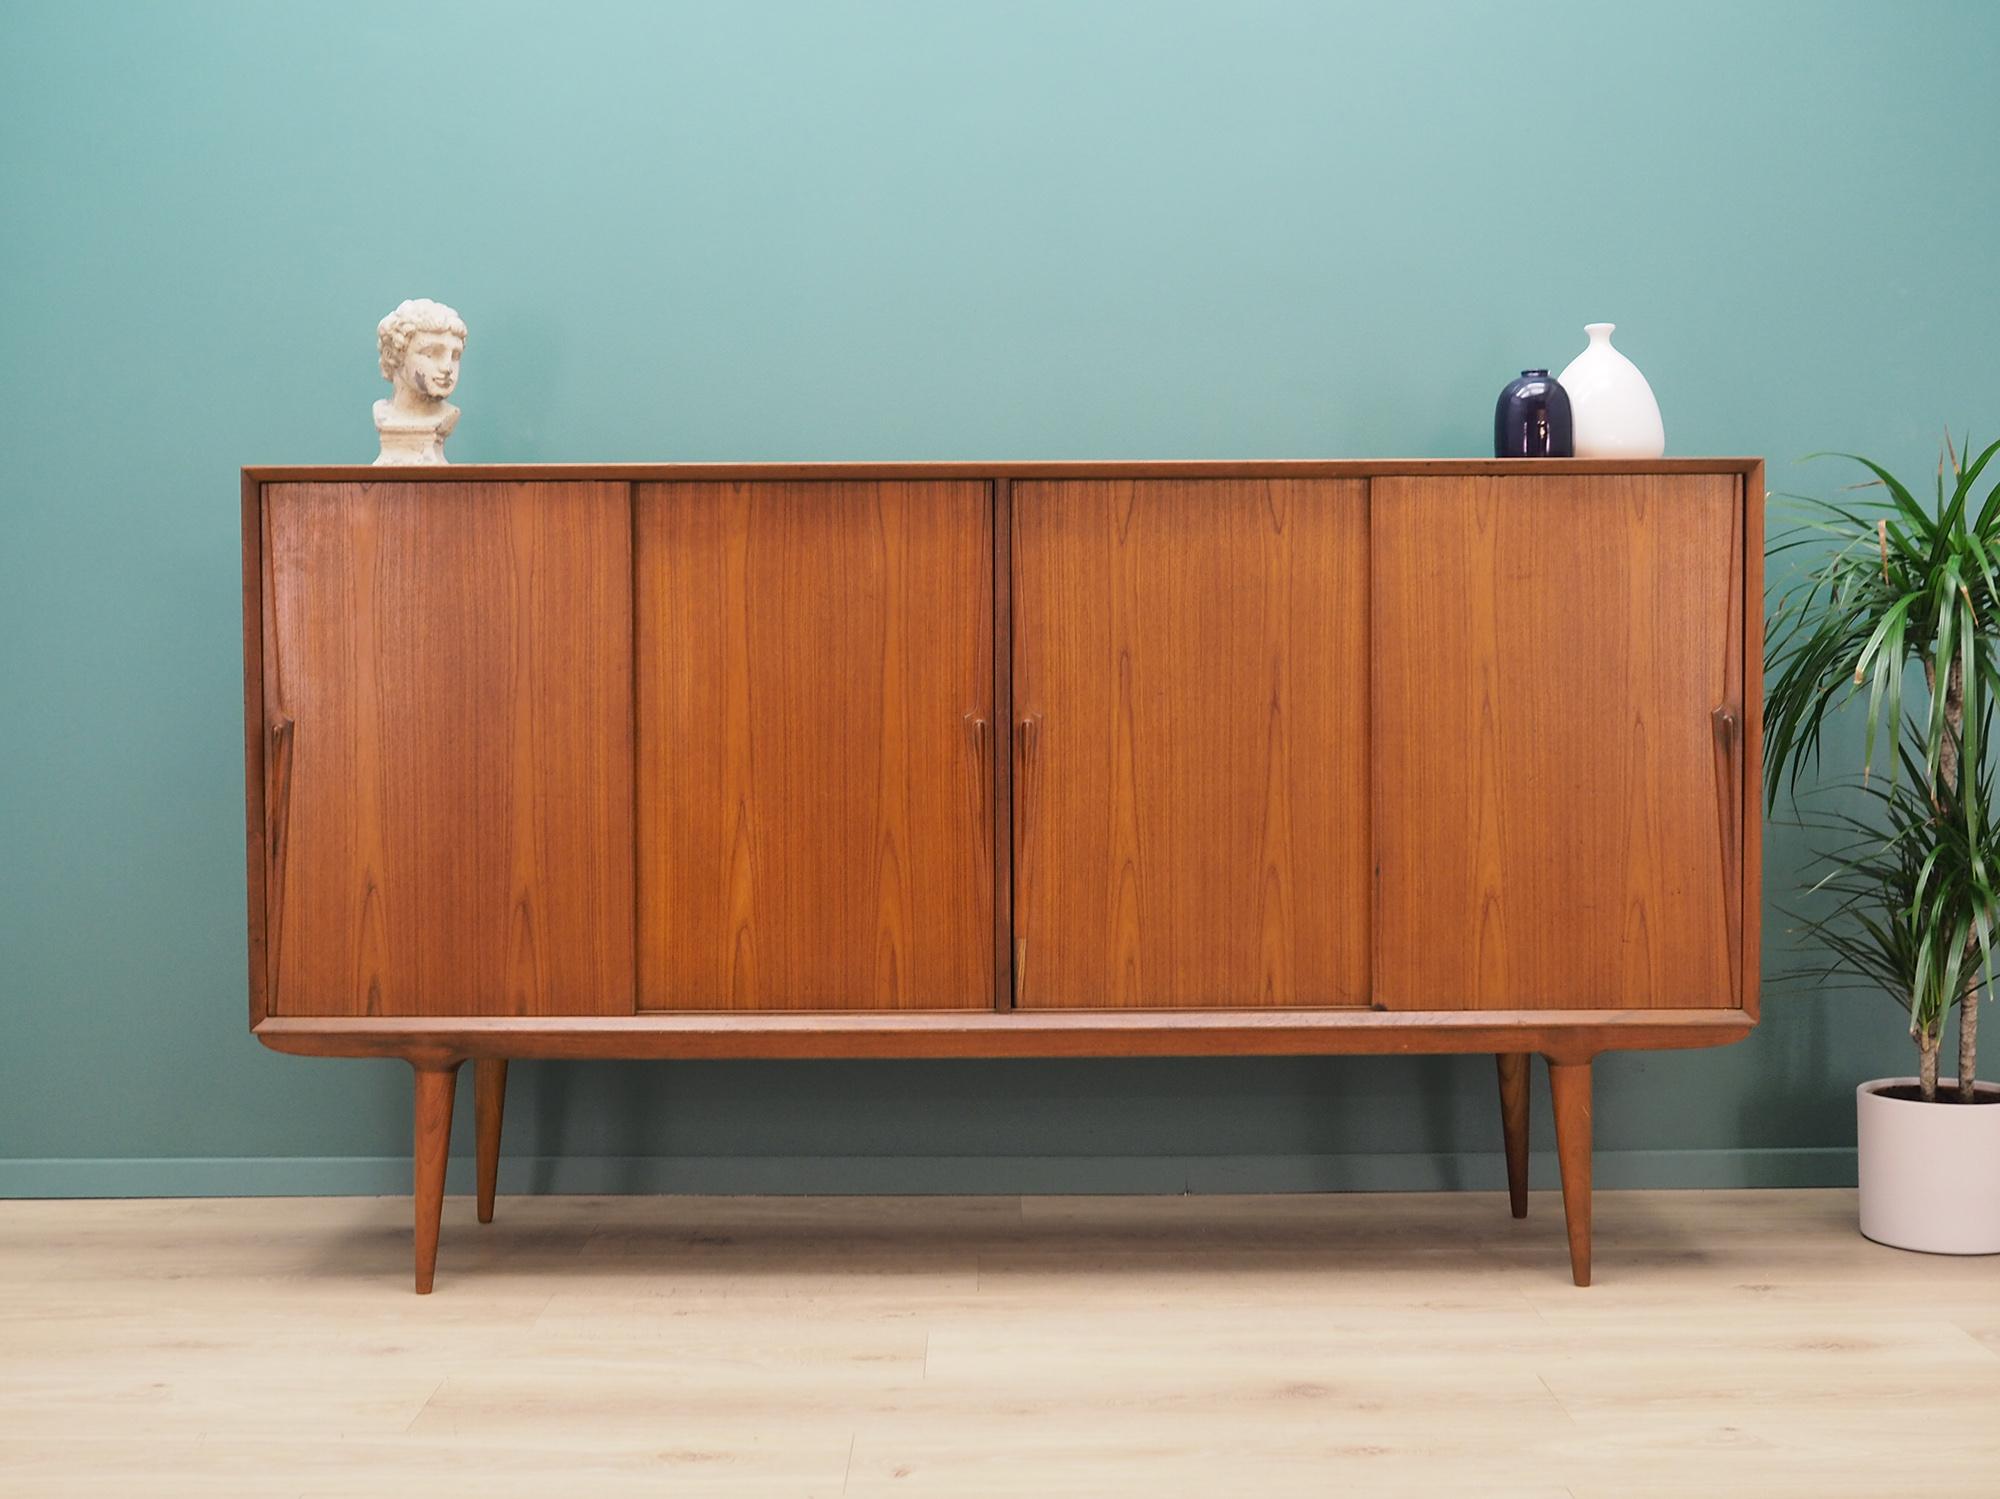 Superb high board from the 1960s-1970s. Minimalist form, Scandinavian design. Furniture is covered with teak veneer, legs are made of solid teak wood. Manufactured by Omann Jun. High board has five shelves and six stylish drawers. Preserved in good